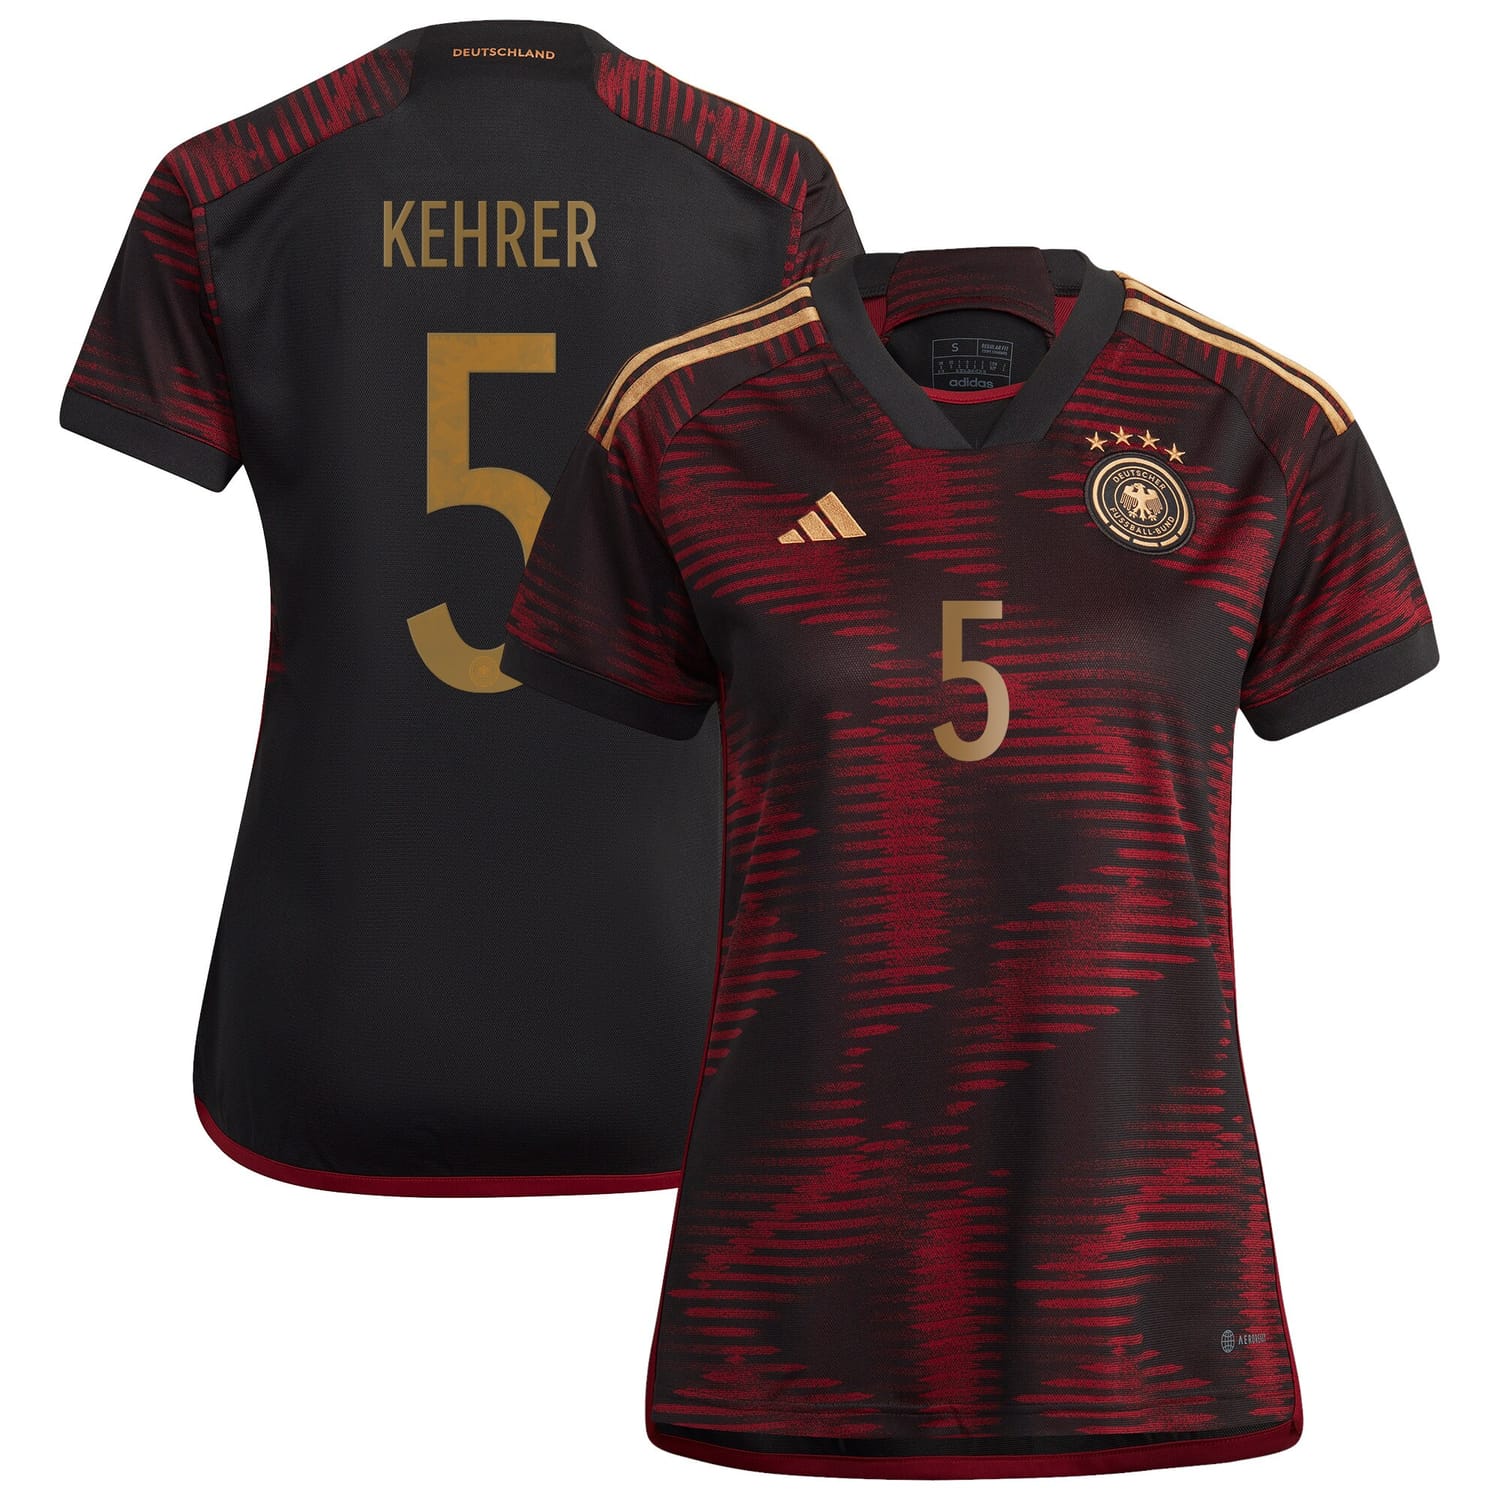 Germany National Team Away Jersey Shirt player Kehrer 5 printing for Women